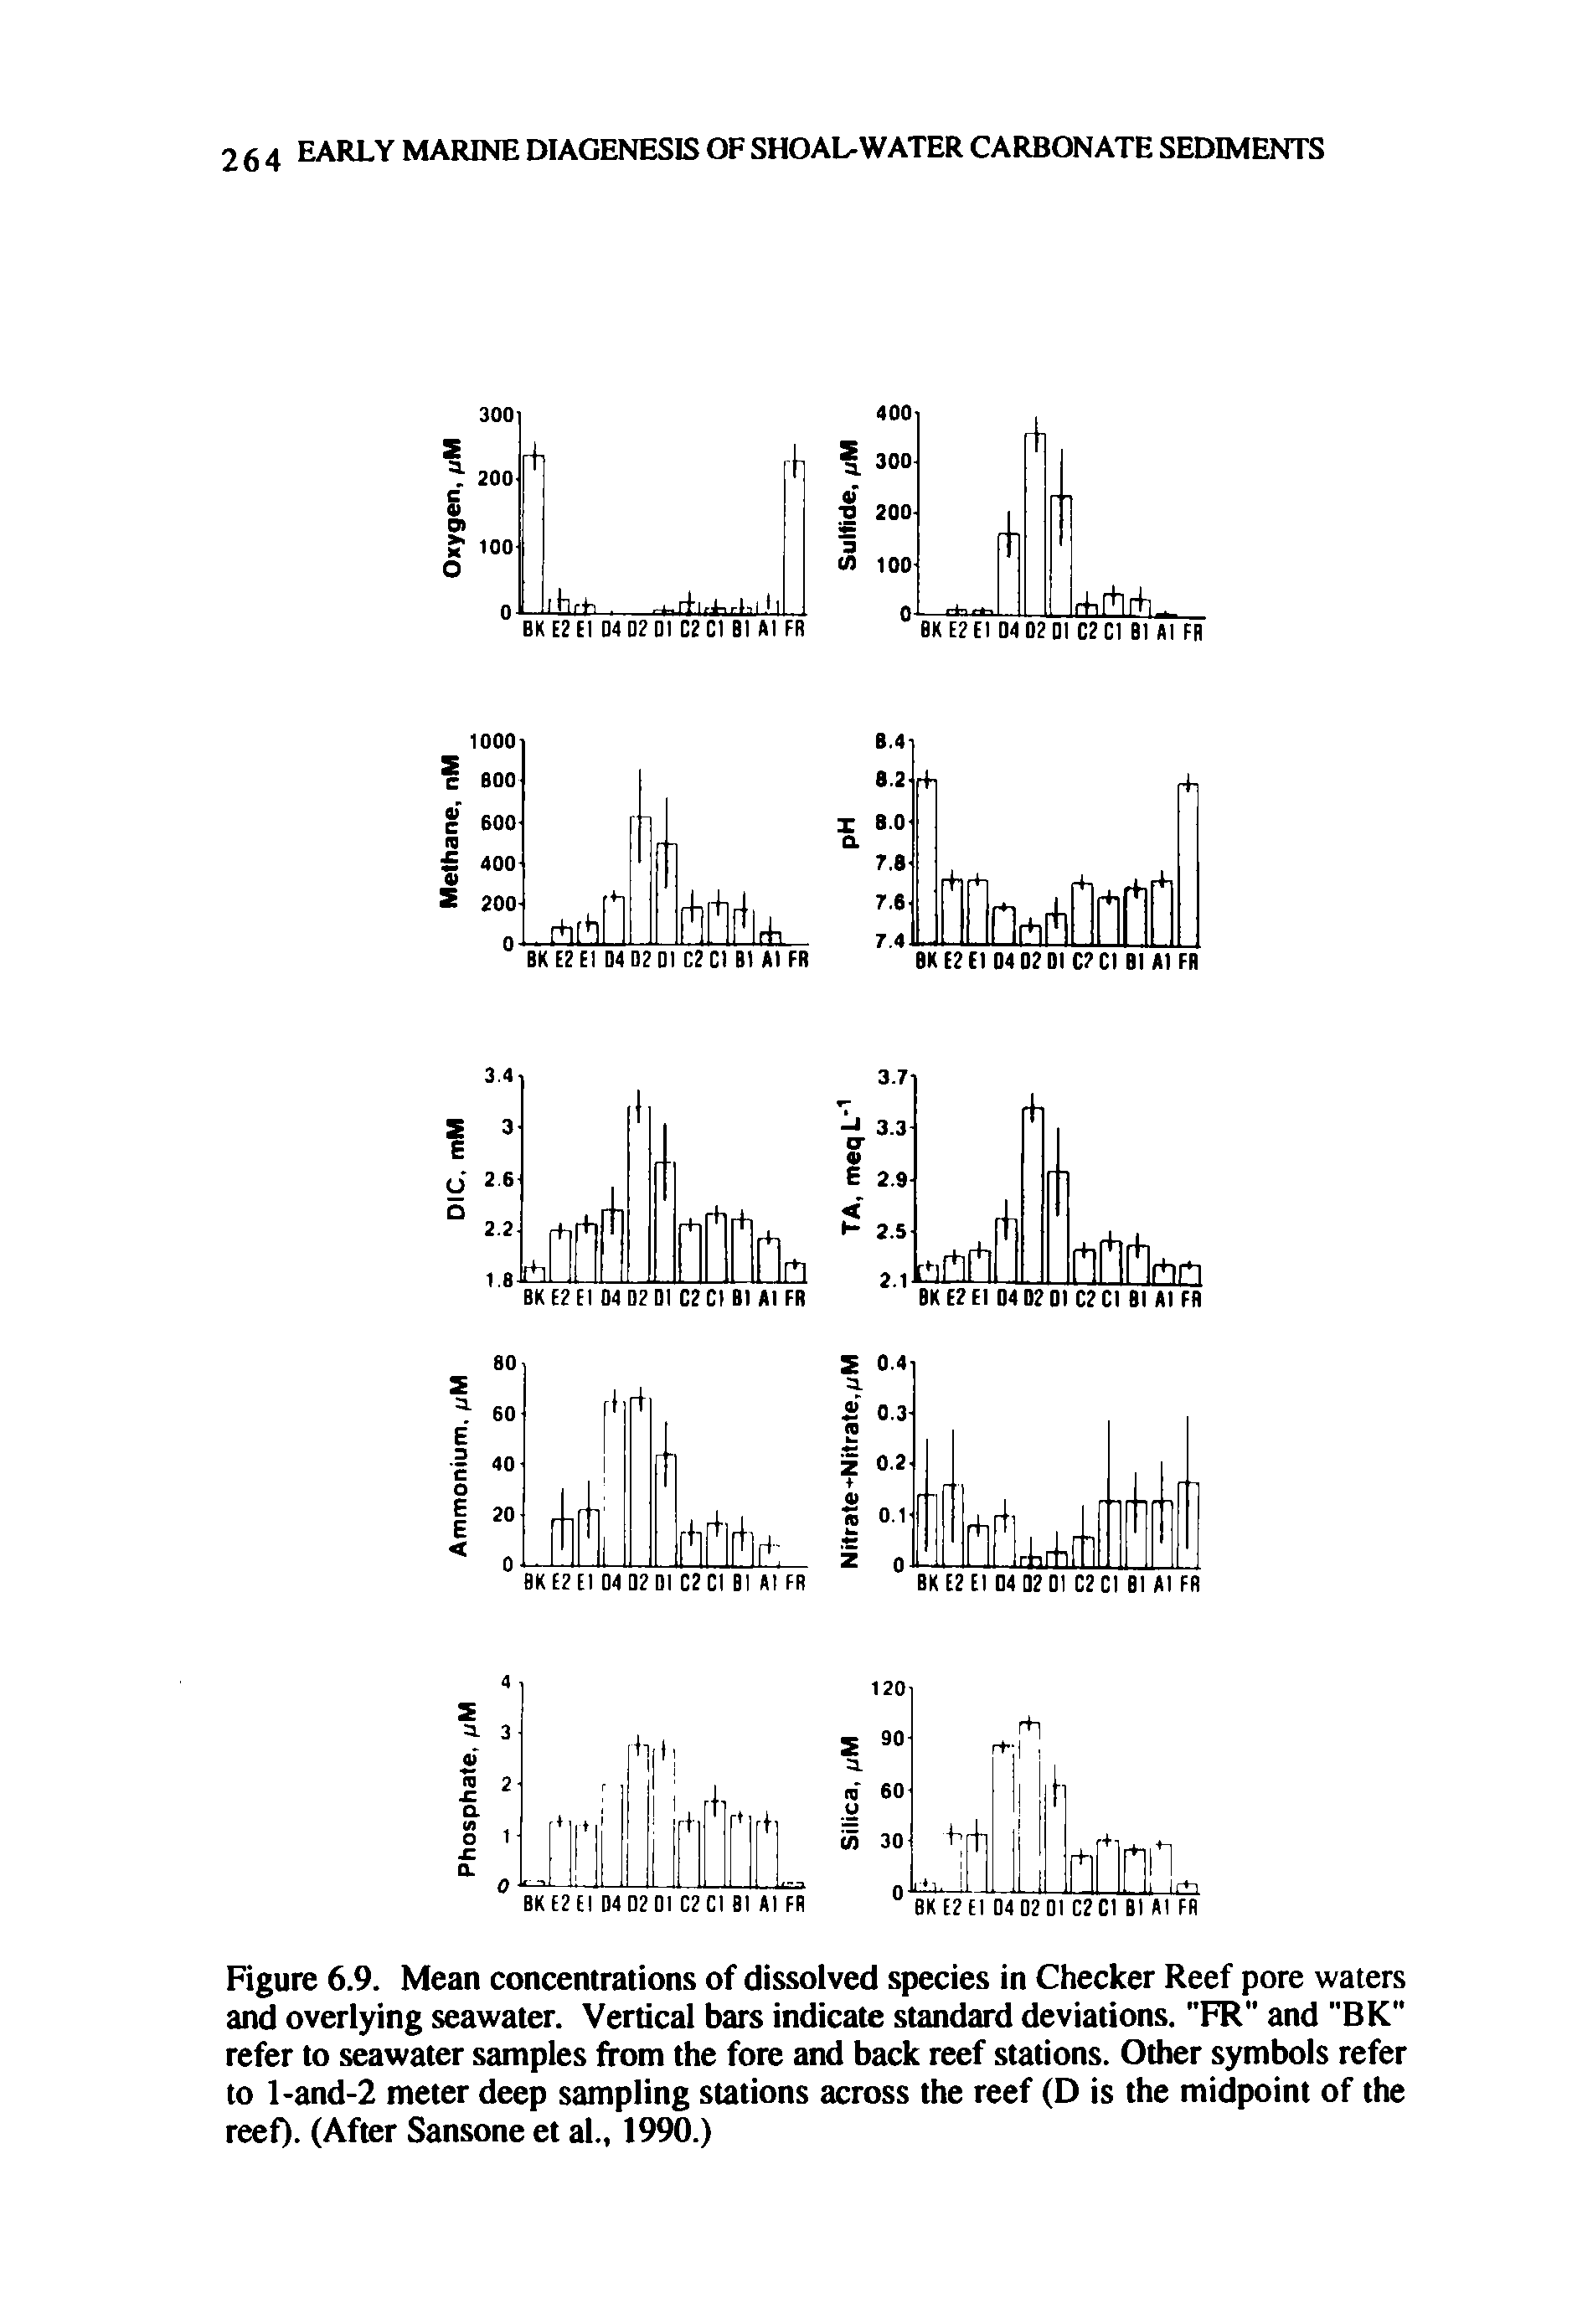 Figure 6.9. Mean concentrations of dissolved species in Checker Reef pore waters and overlying seawater. Vertical bars indicate standard deviations. "FR" and "BK" refer to seawater samples from the fore and back reef stations. Other symbols refer to l-and-2 meter deep sampling stations across the reef (D is the midpoint of the reef). (After Sansone et al., 1990.)...